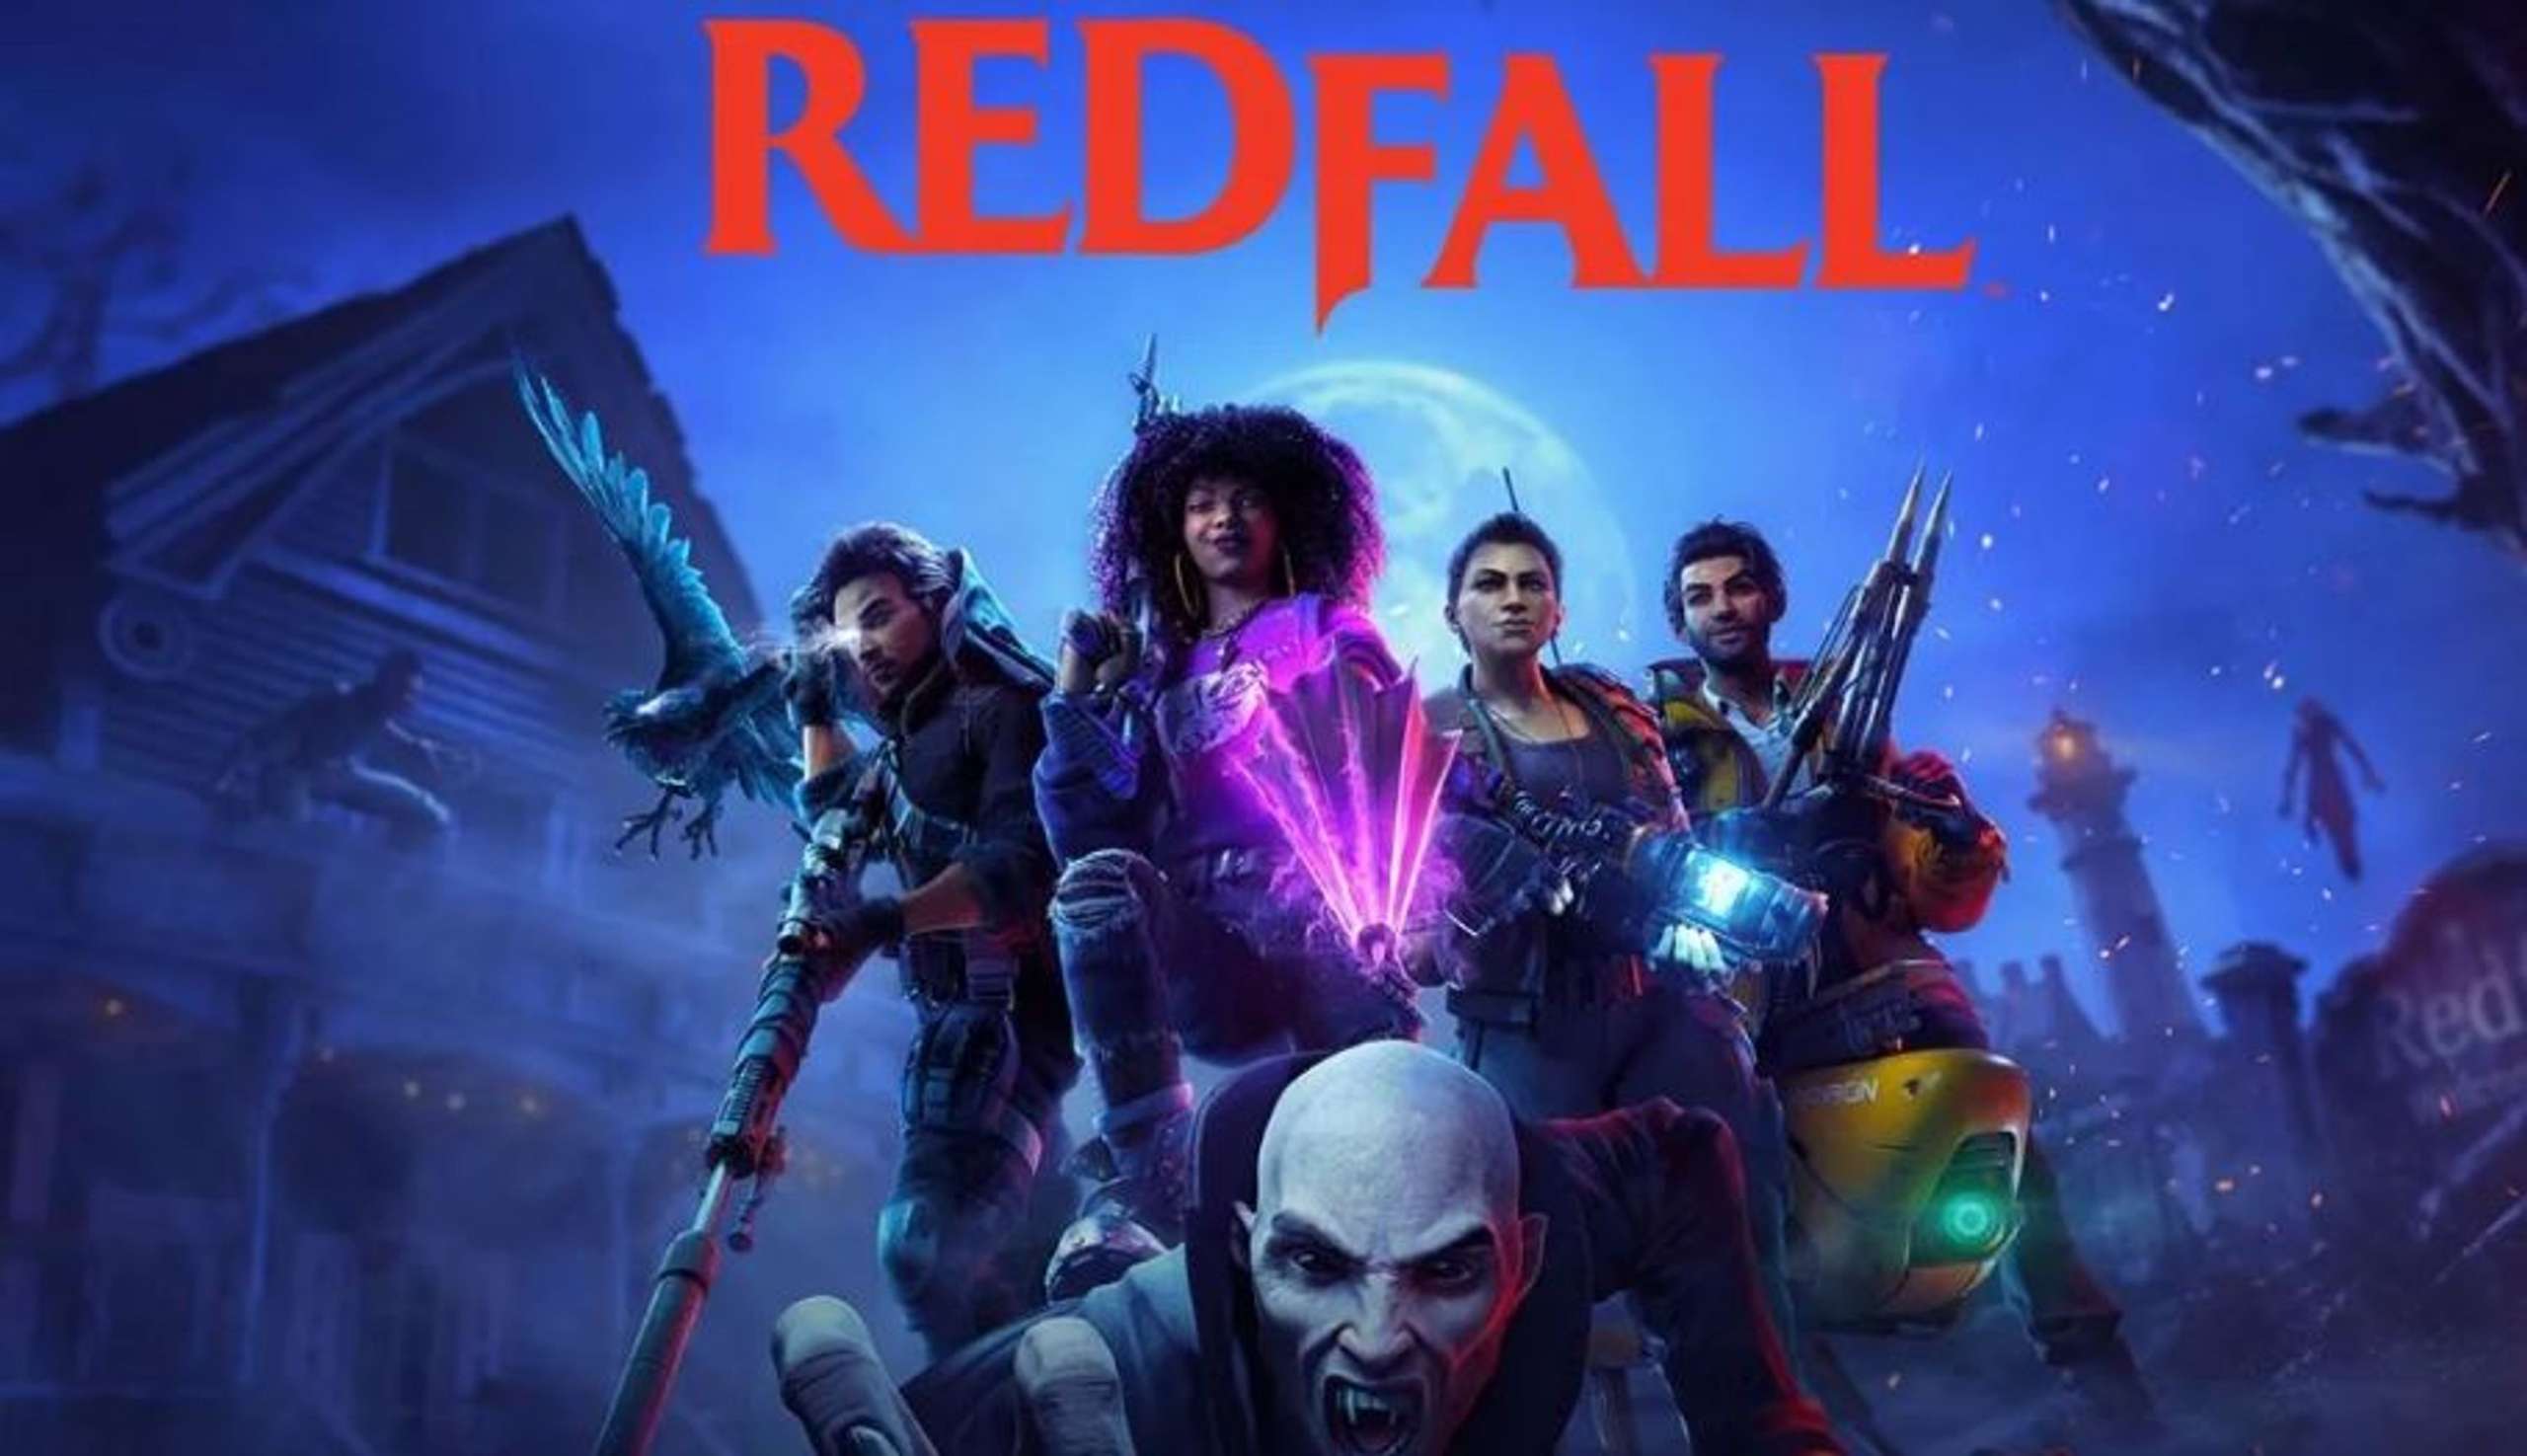 The Arkane Studios Team Will Have Only One End For Red Fall The Developers Have Not Provided Alternative Endings